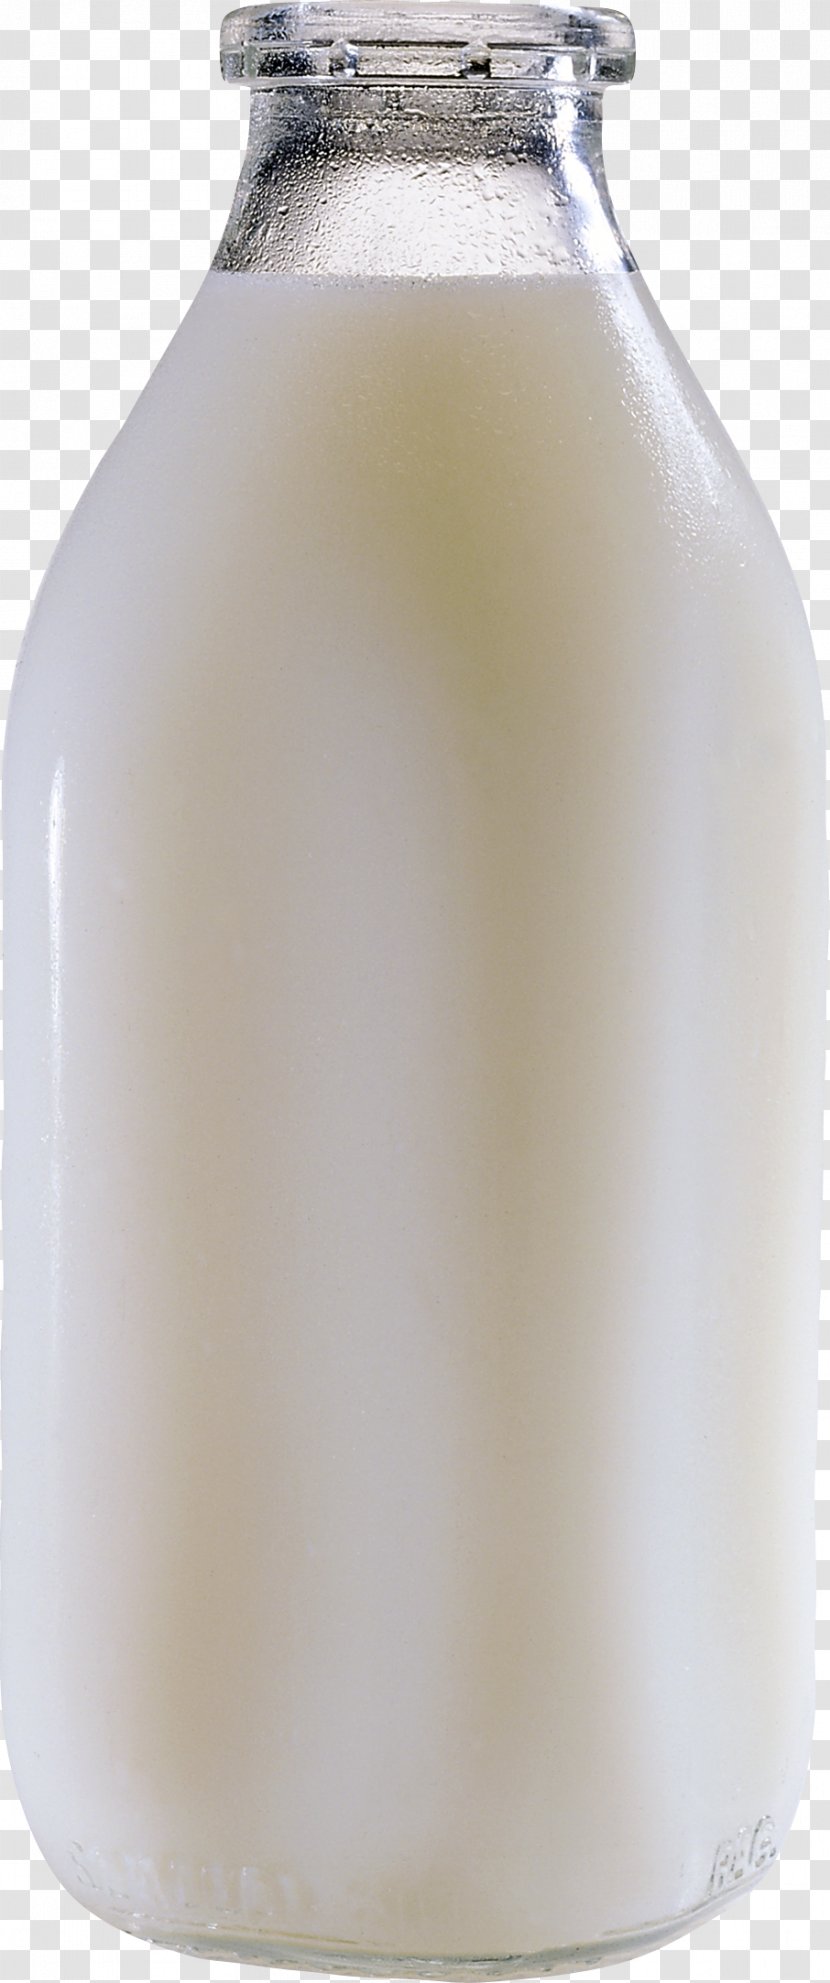 Cow's Milk Bottle Dairy Product - Printing - Transparent PNG